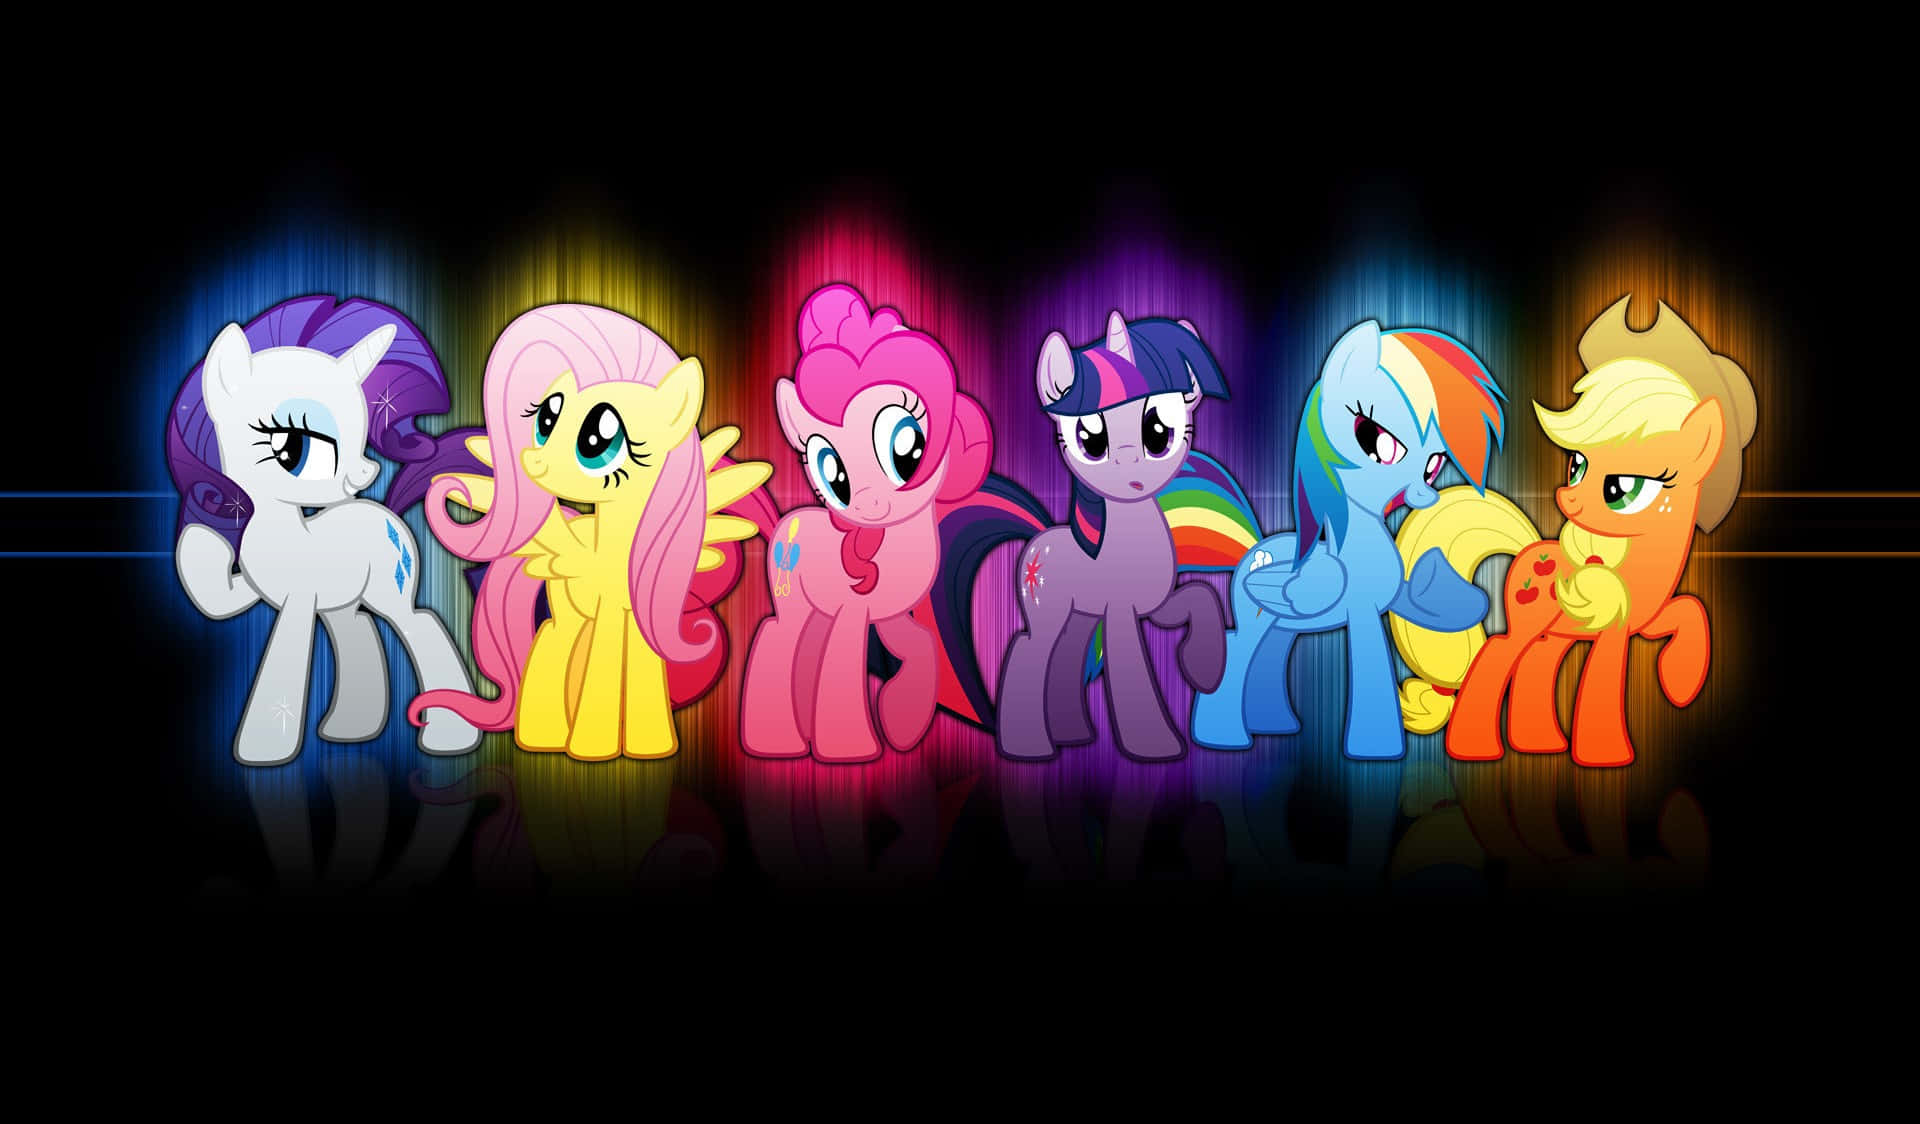 MLP Background Colorful Pony Characters